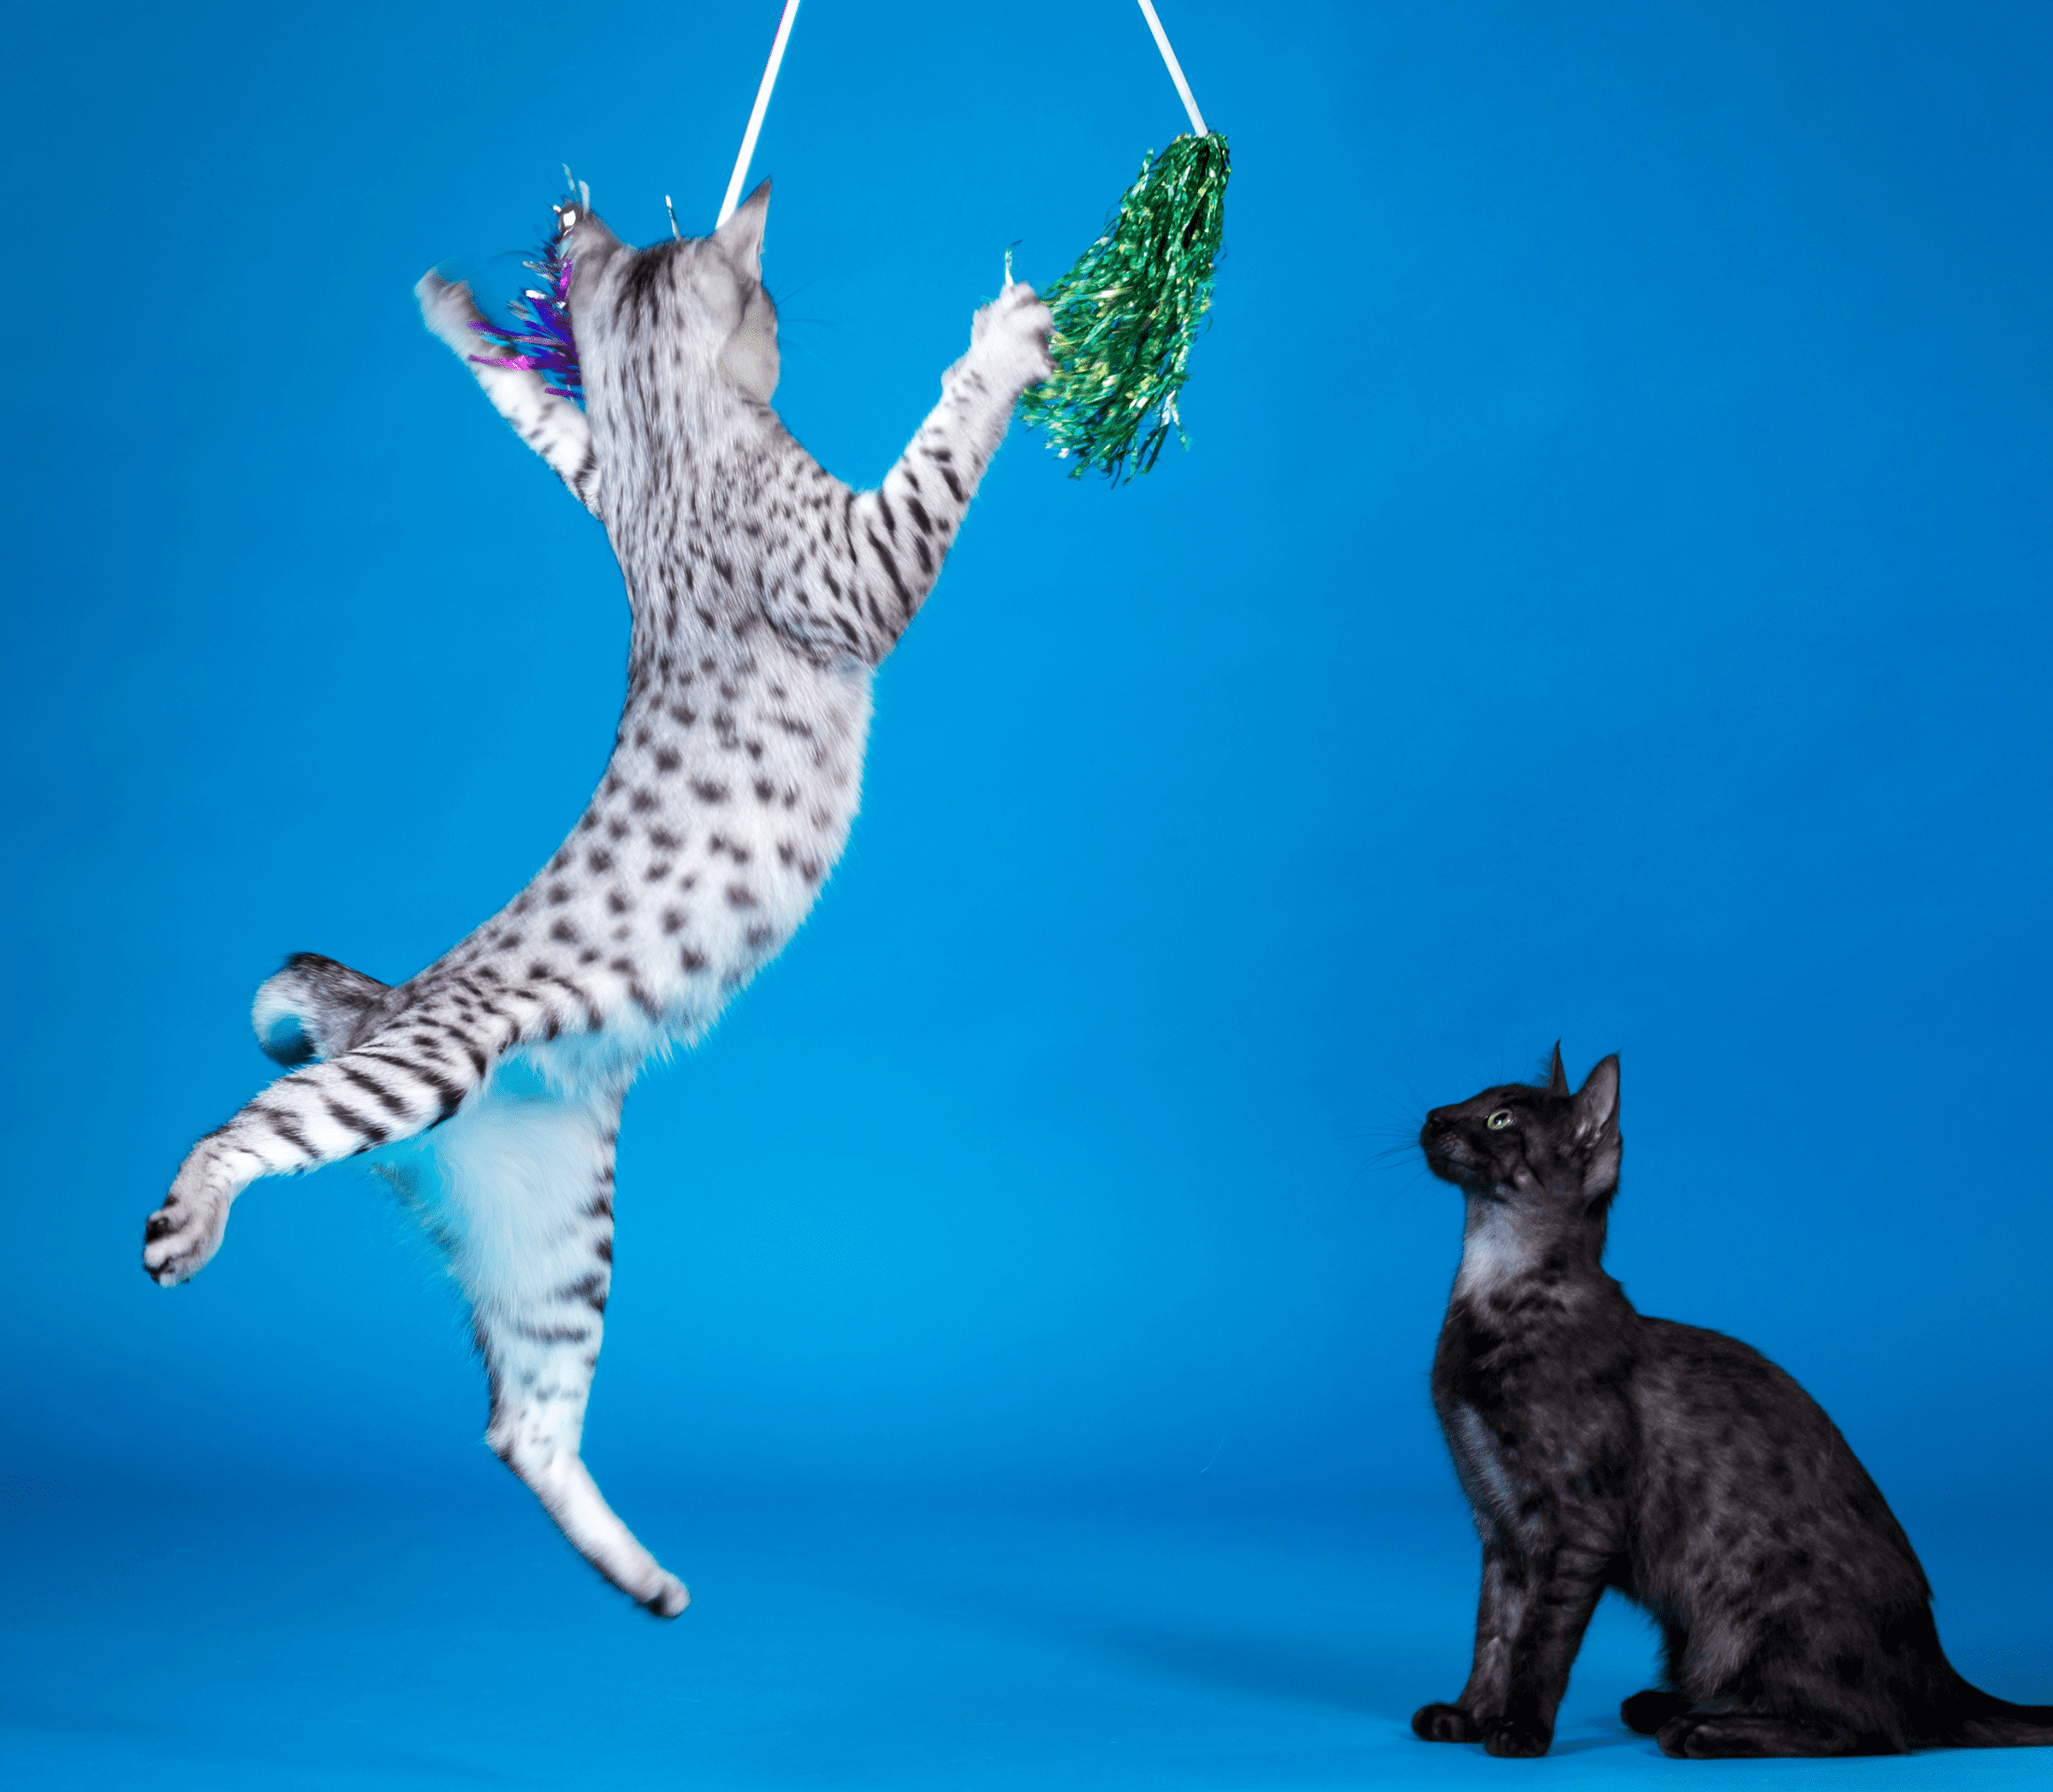 Spotted white cat playing on a hanging string with a black cat